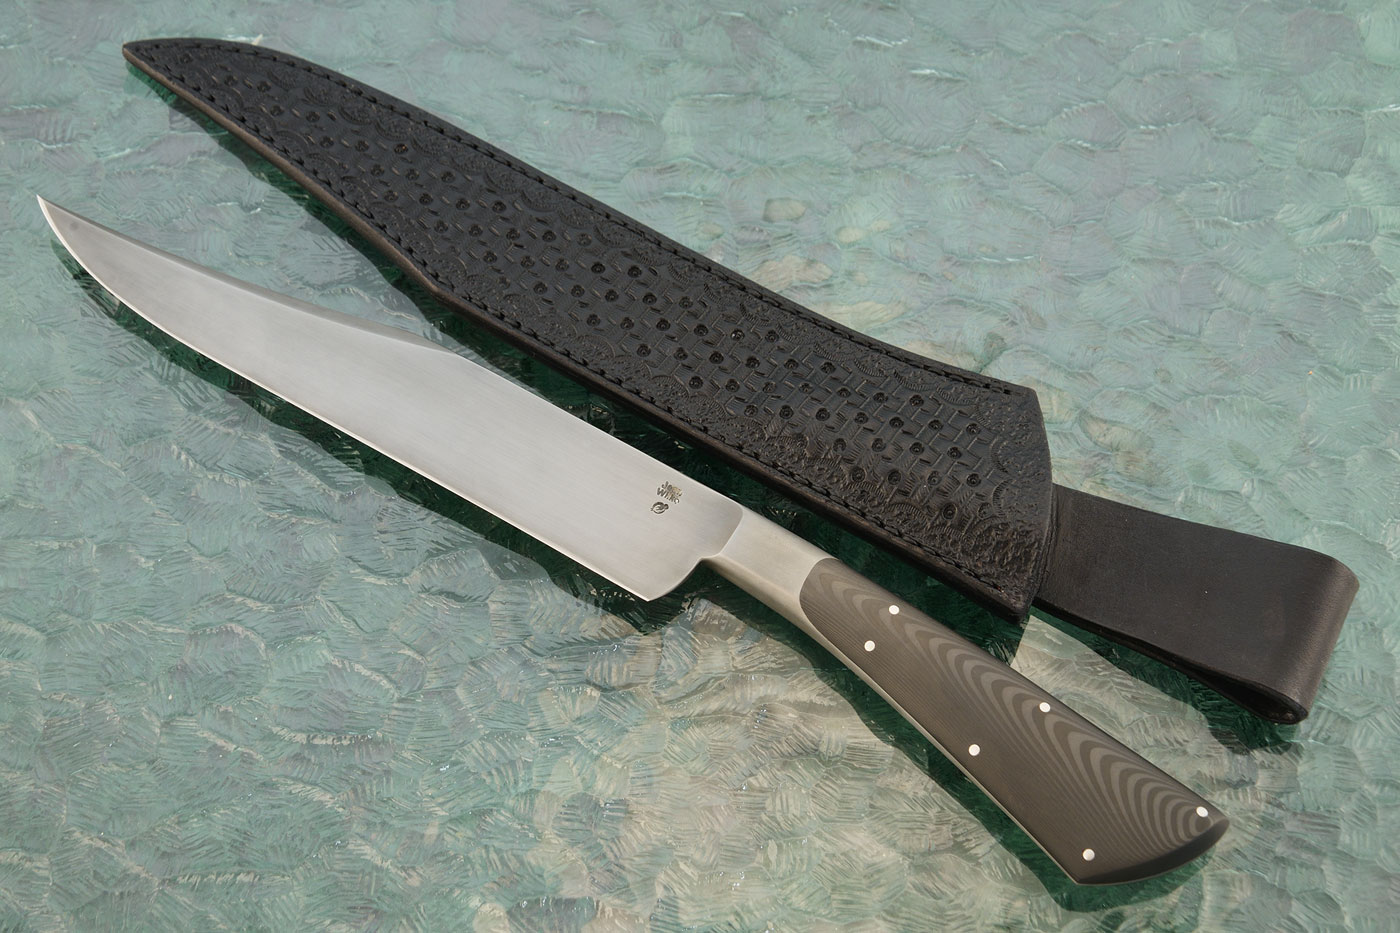 Integral Camping Bowie with Uni-Directional Carbon Fiber